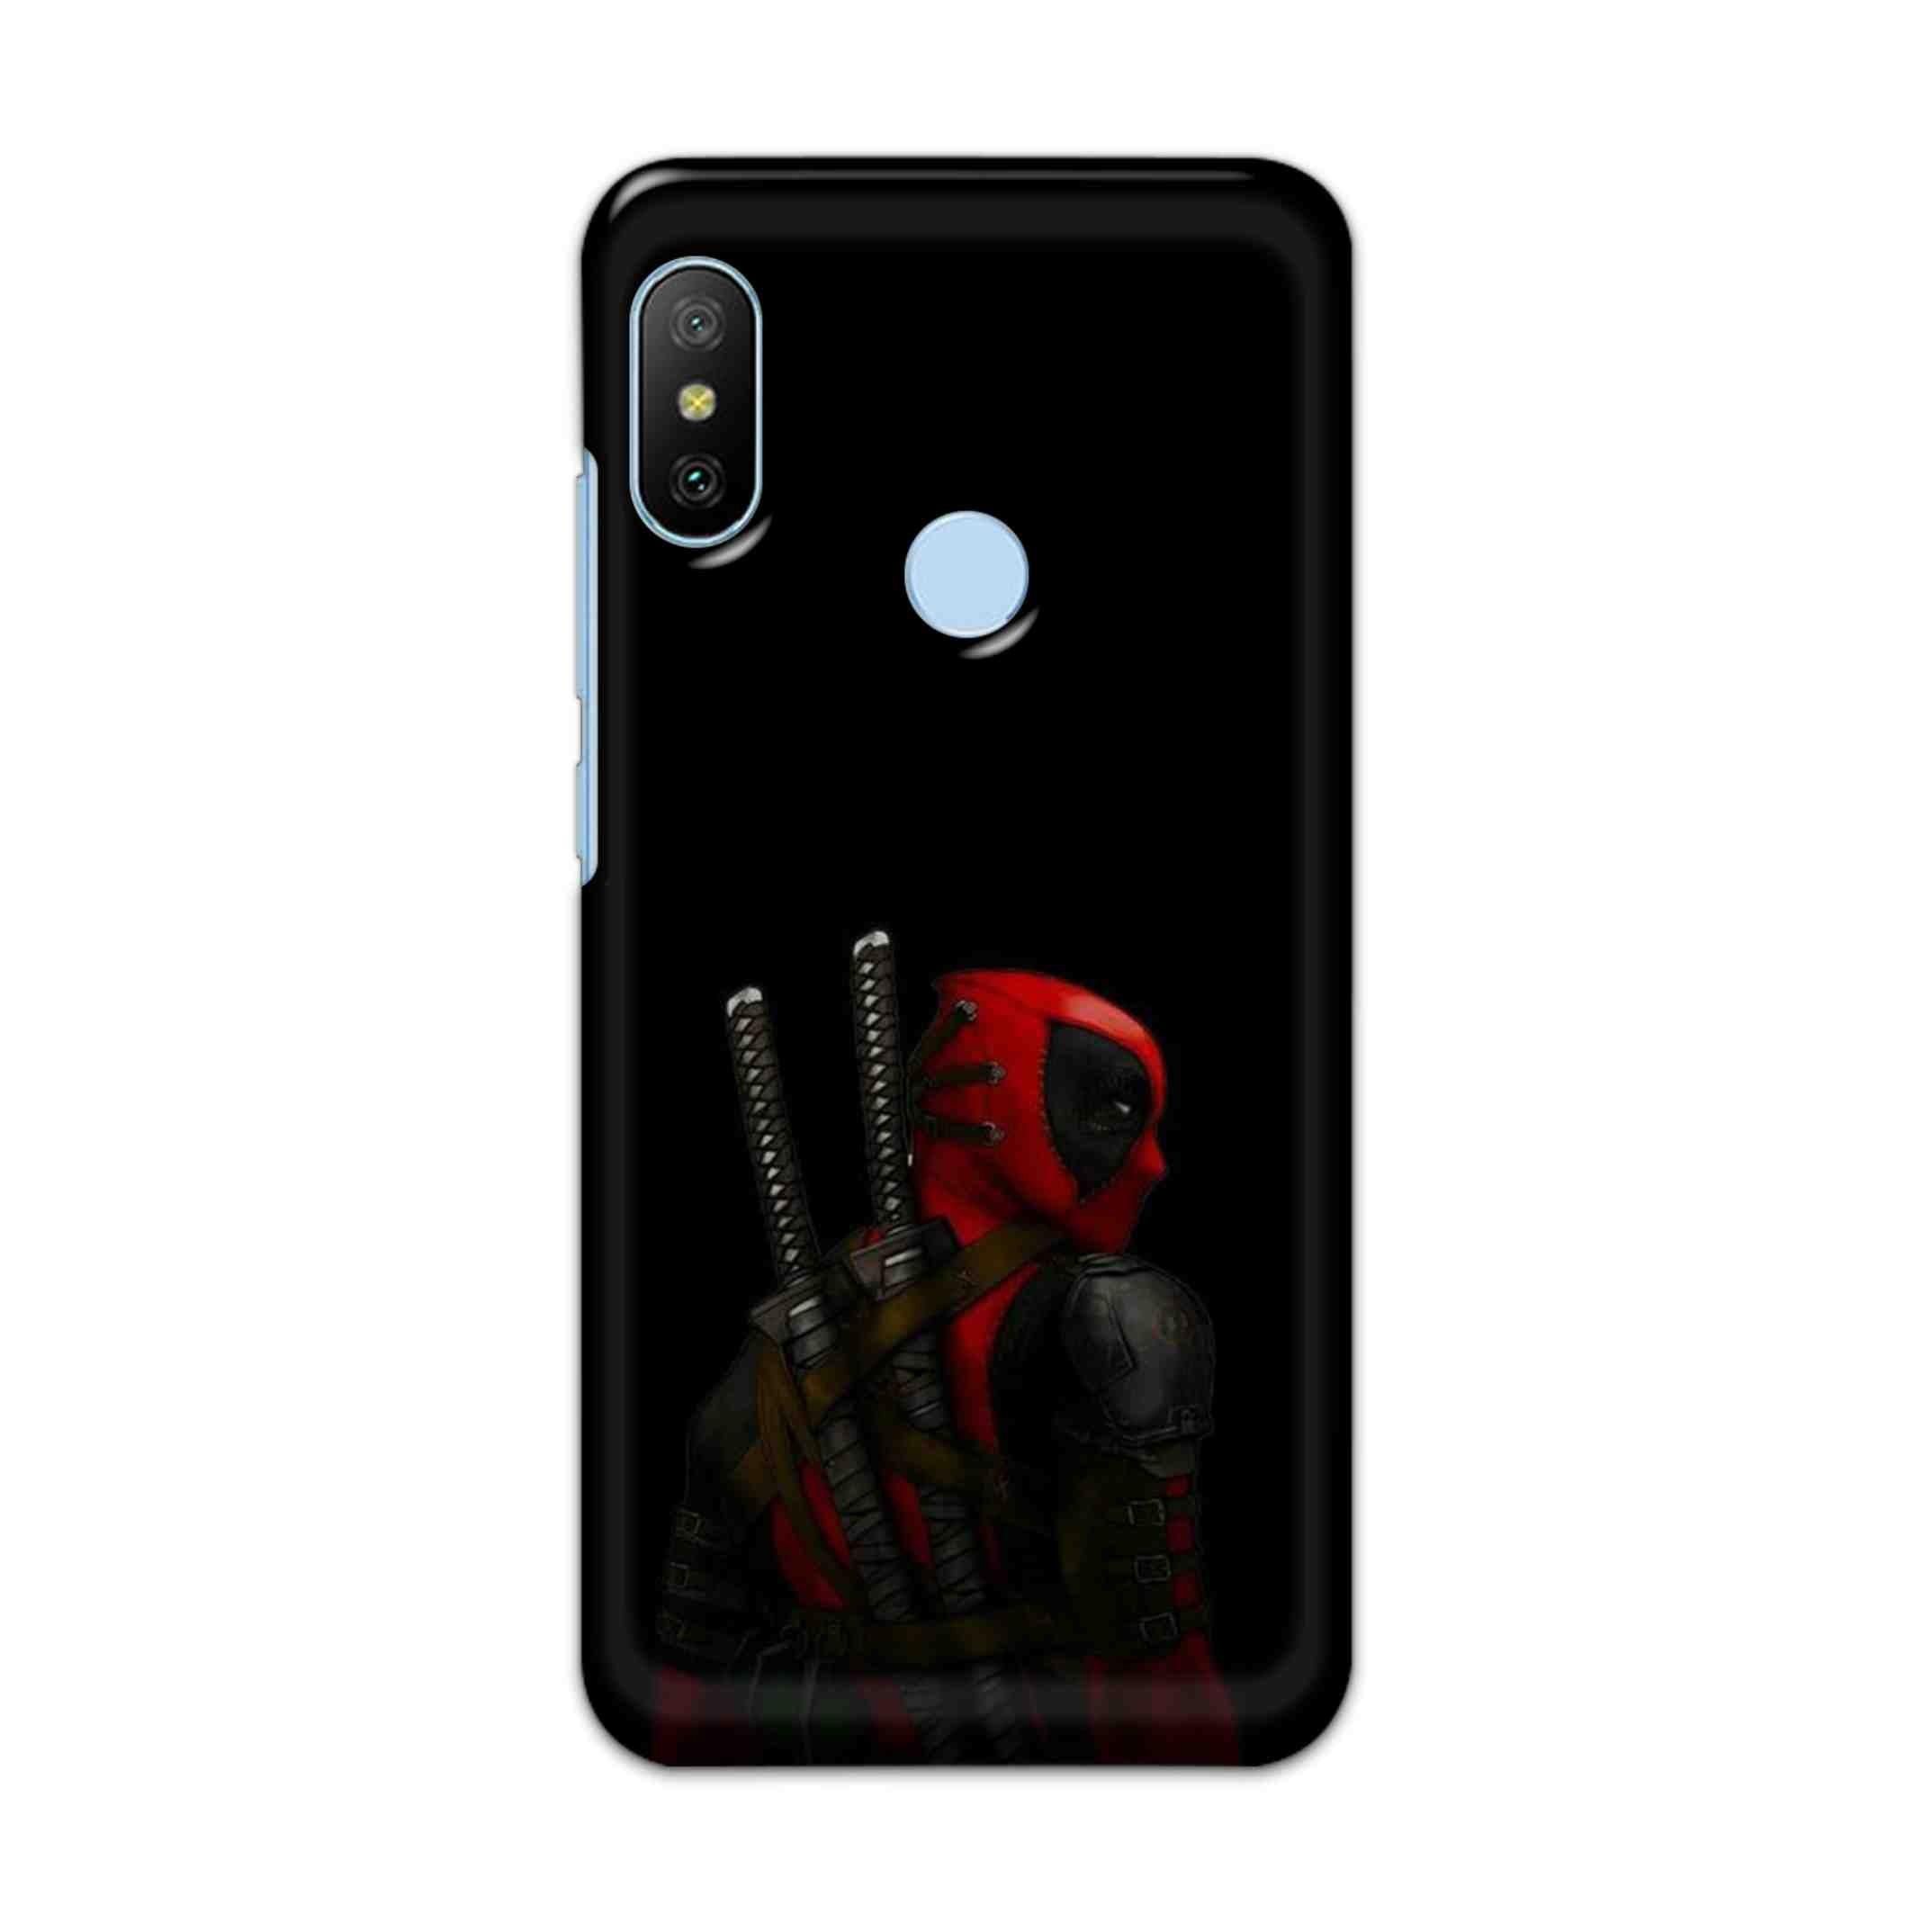 Buy Deadpool Hard Back Mobile Phone Case/Cover For Xiaomi Redmi 6 Pro Online